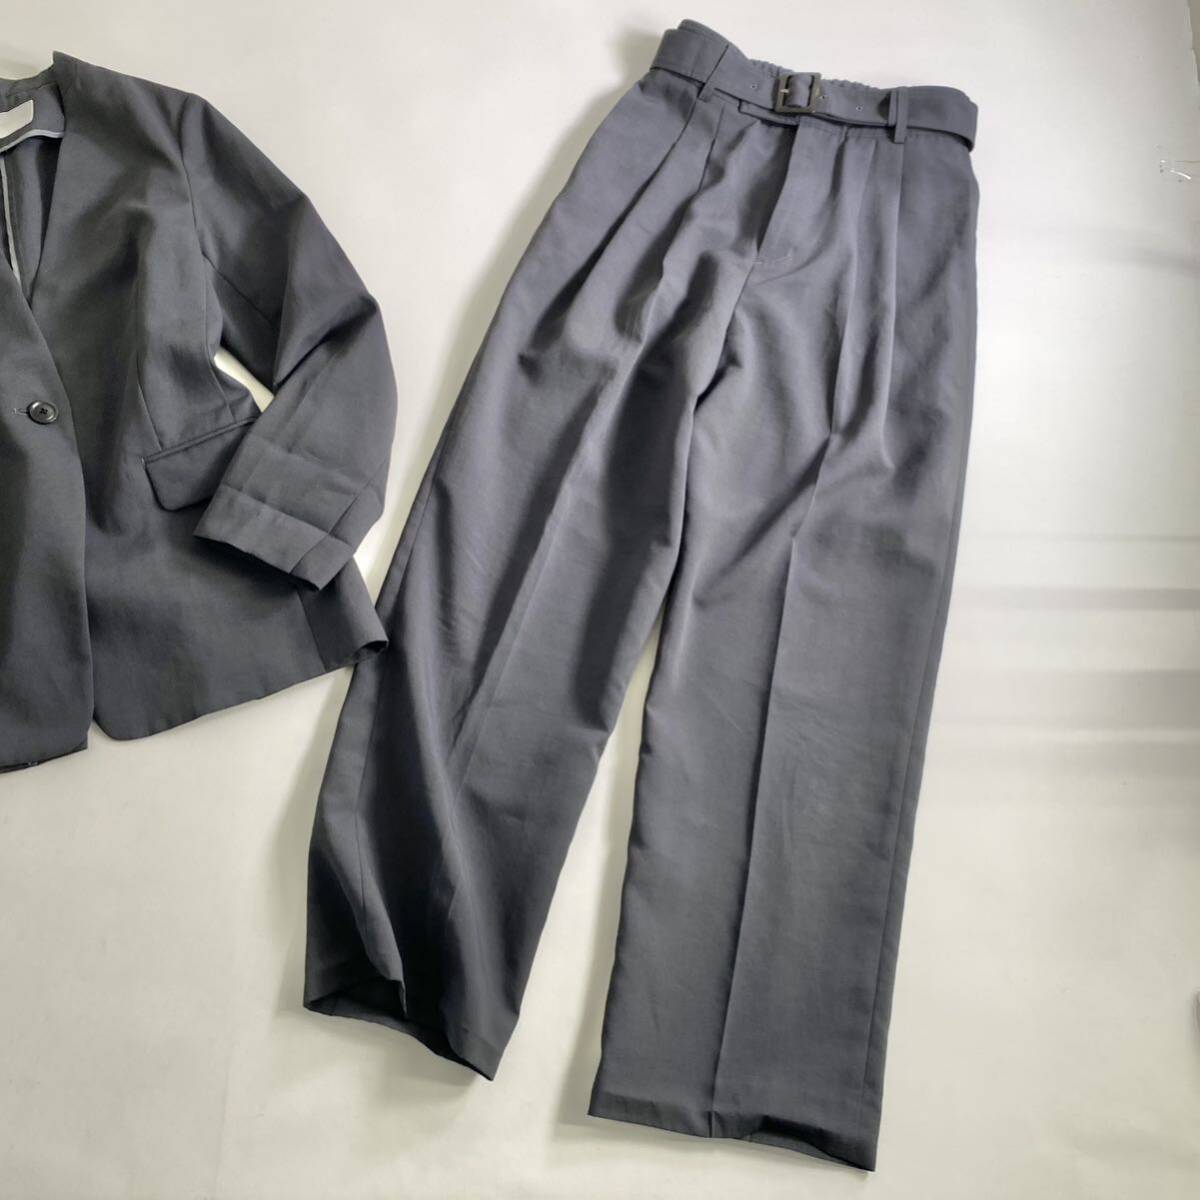 Ae11 URBAN RESEARCH Urban Research pants setup casual oks no color jacket / belt attaching high waist pants 36